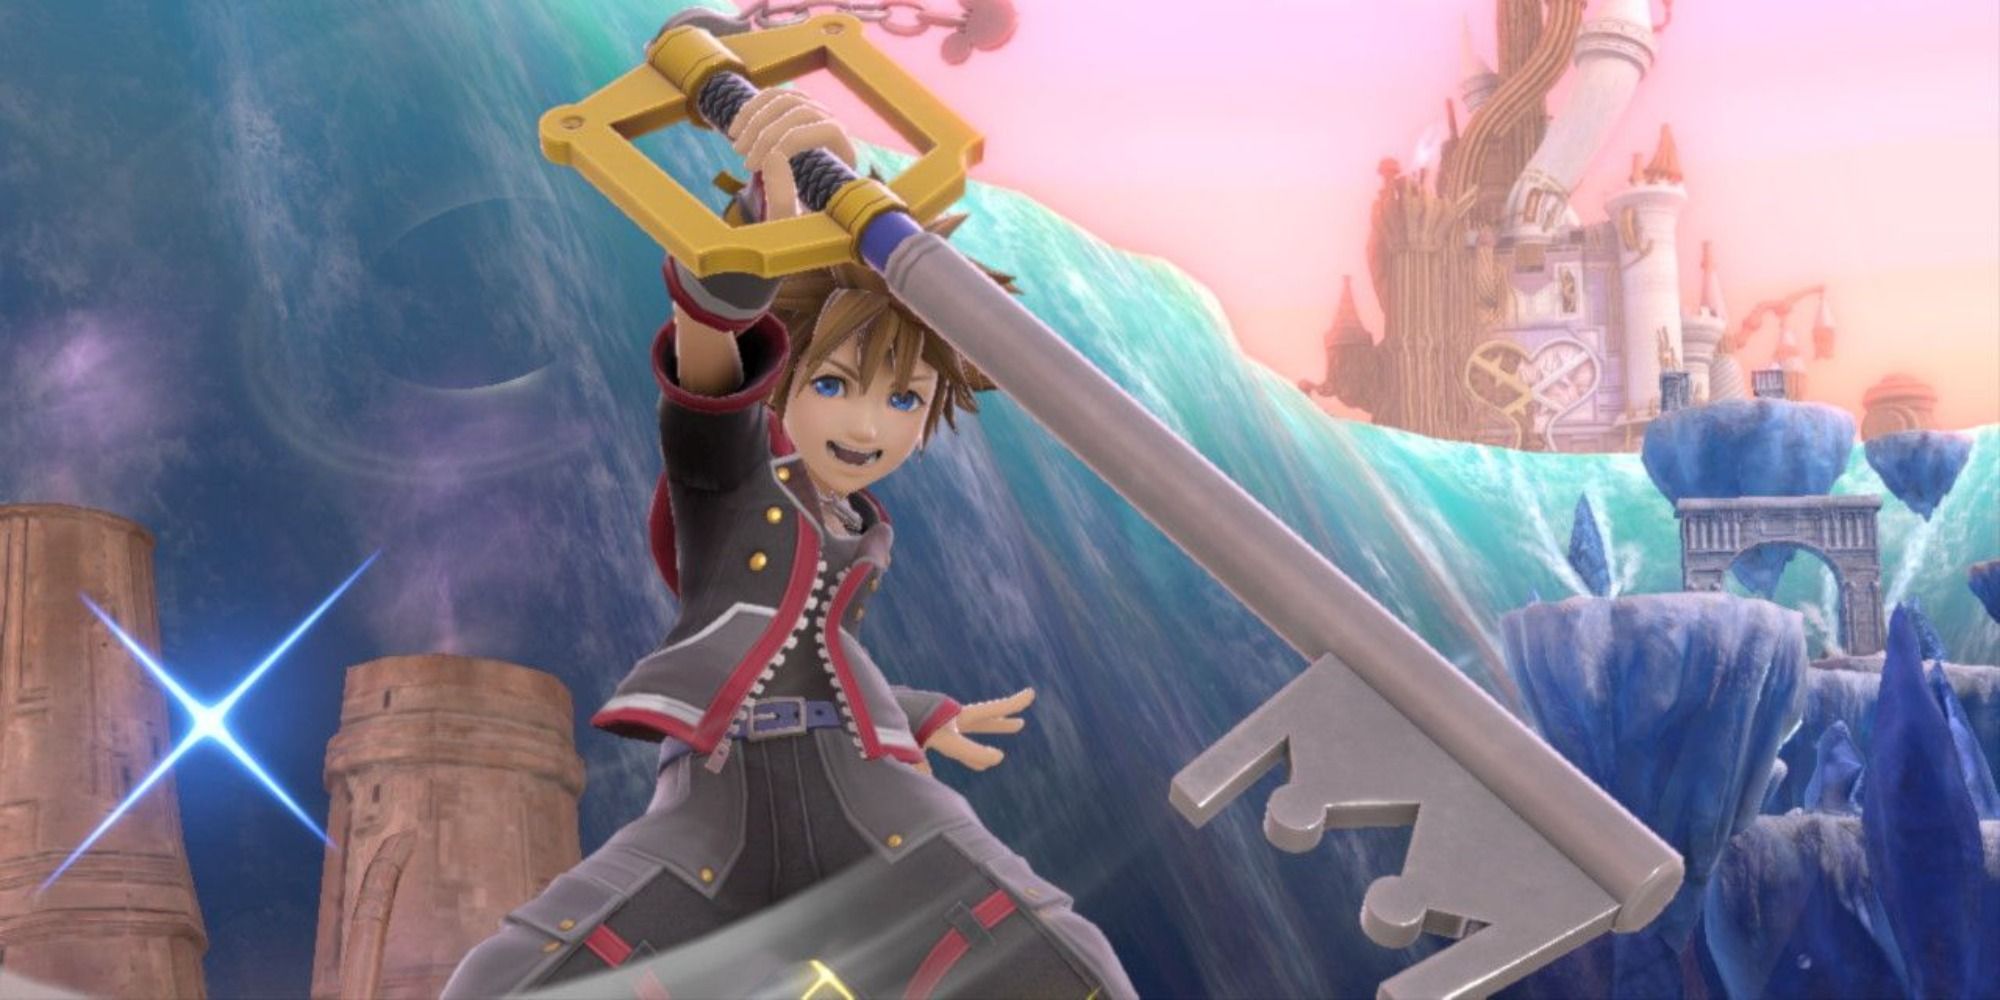 Sora from Kingdom Hearts wielding the Keyblade in Super Smash Bros. Ultimate